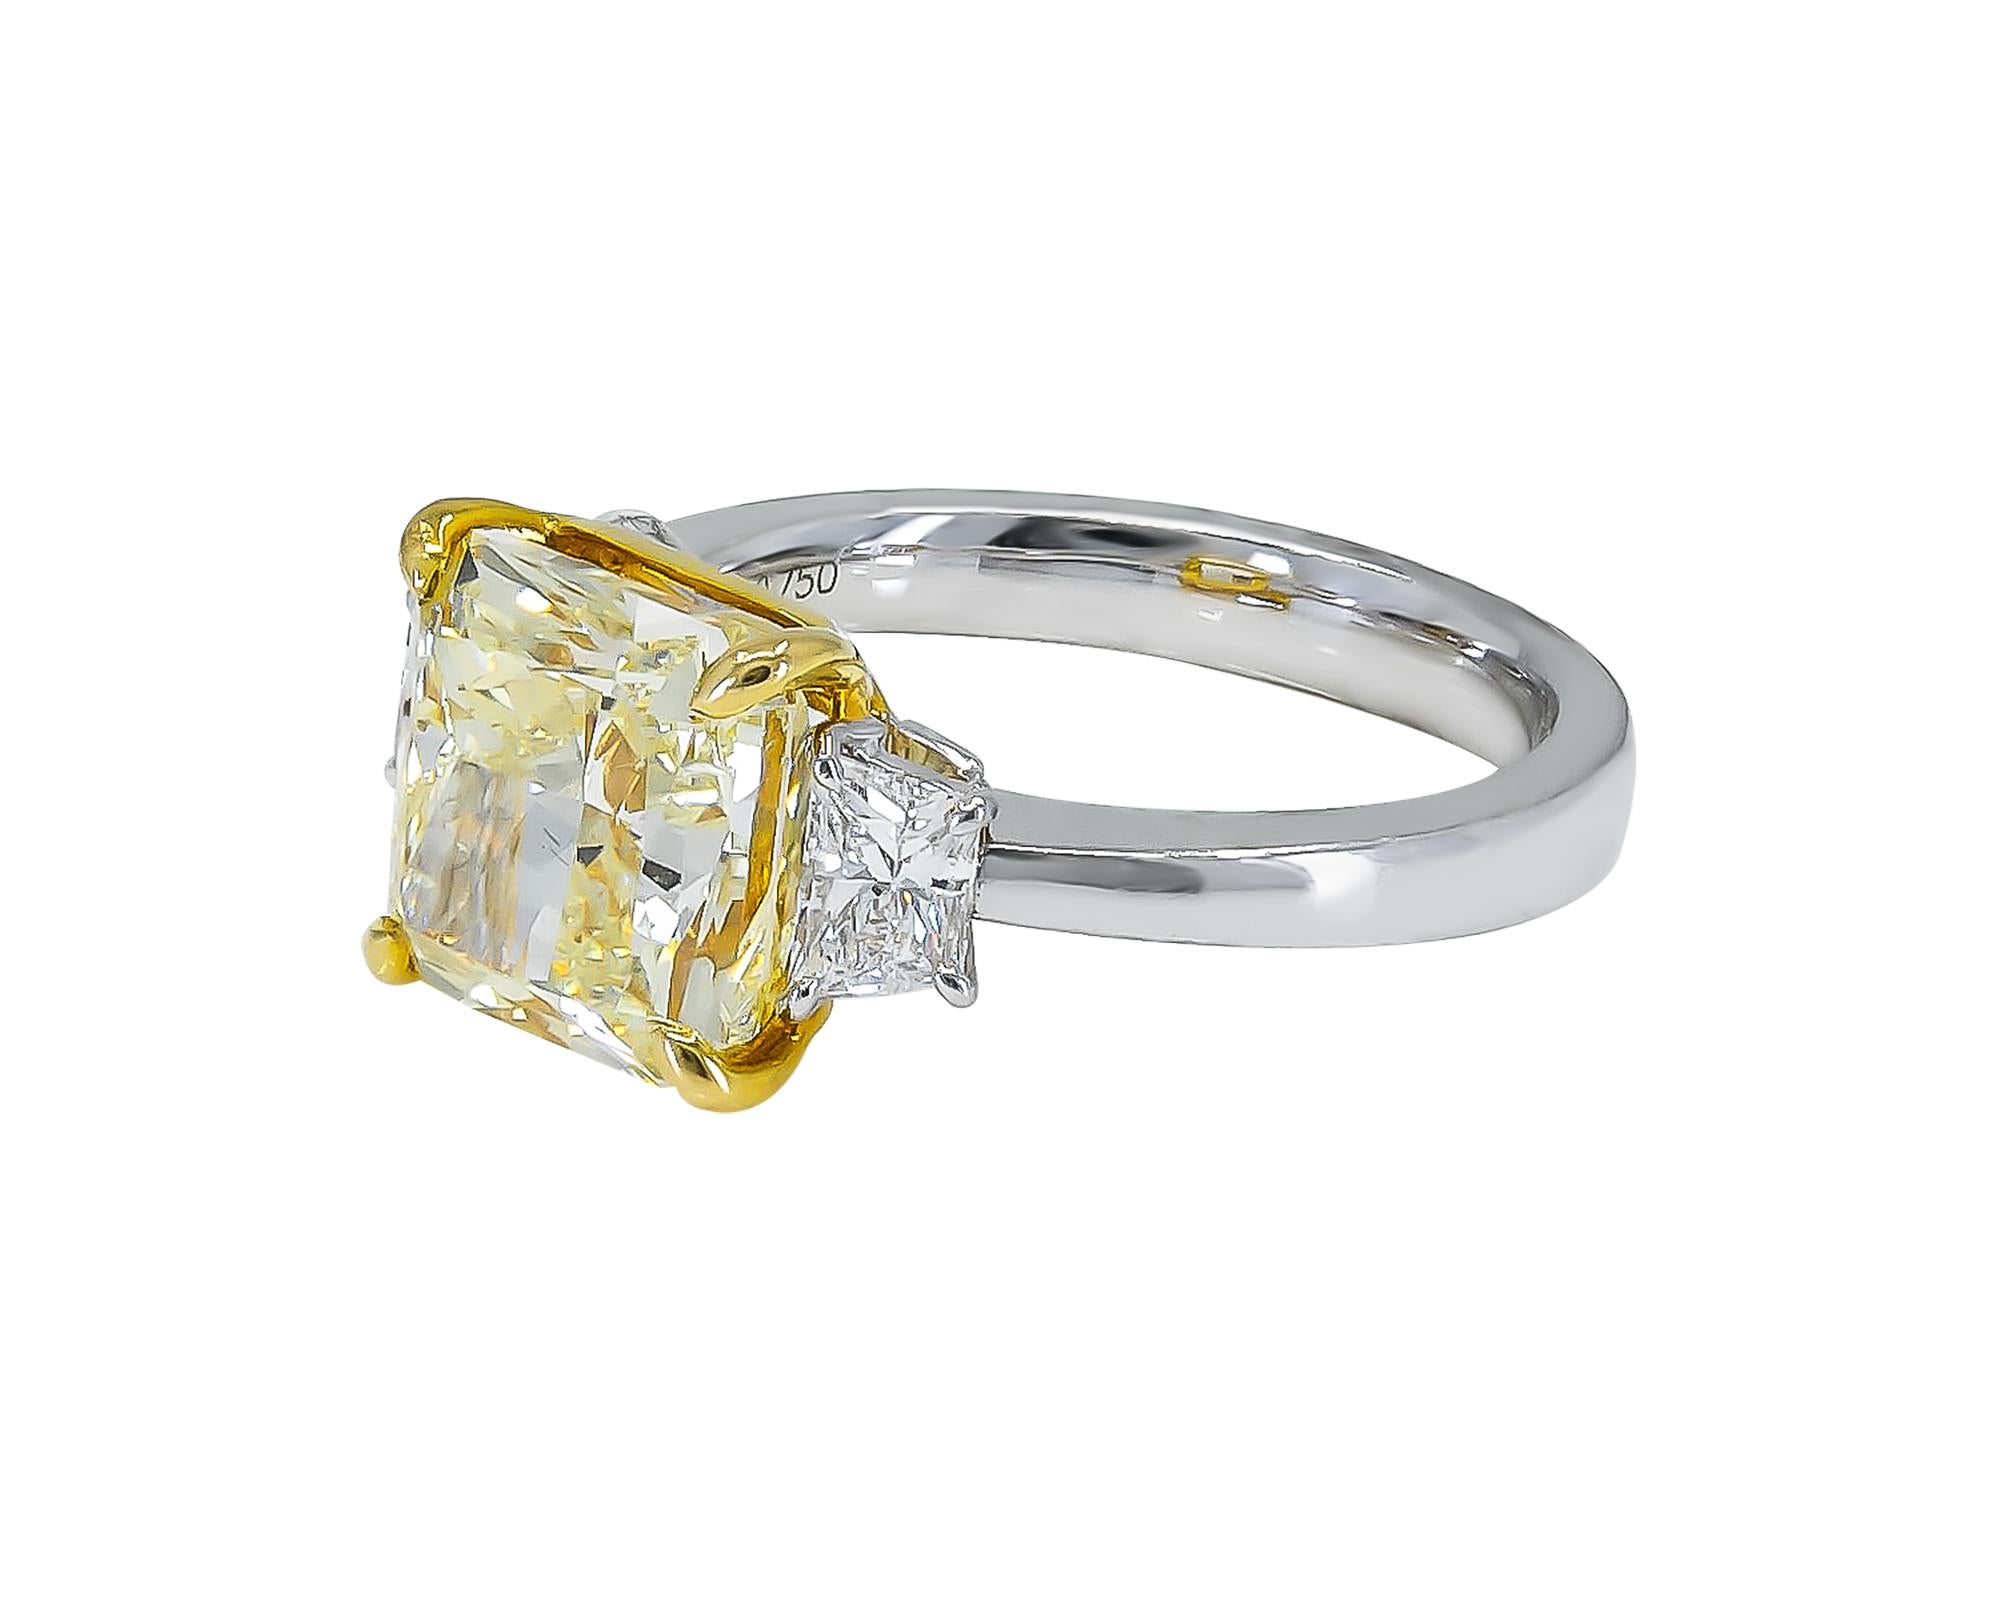 This engagement ring is a breathtaking piece of jewelry that is sure to capture the heart of anyone who lays eyes on it. At the center of the ring is a stunning 5.05-carat fancy intense yellow diamond, cut in a radiant shape that adds to its